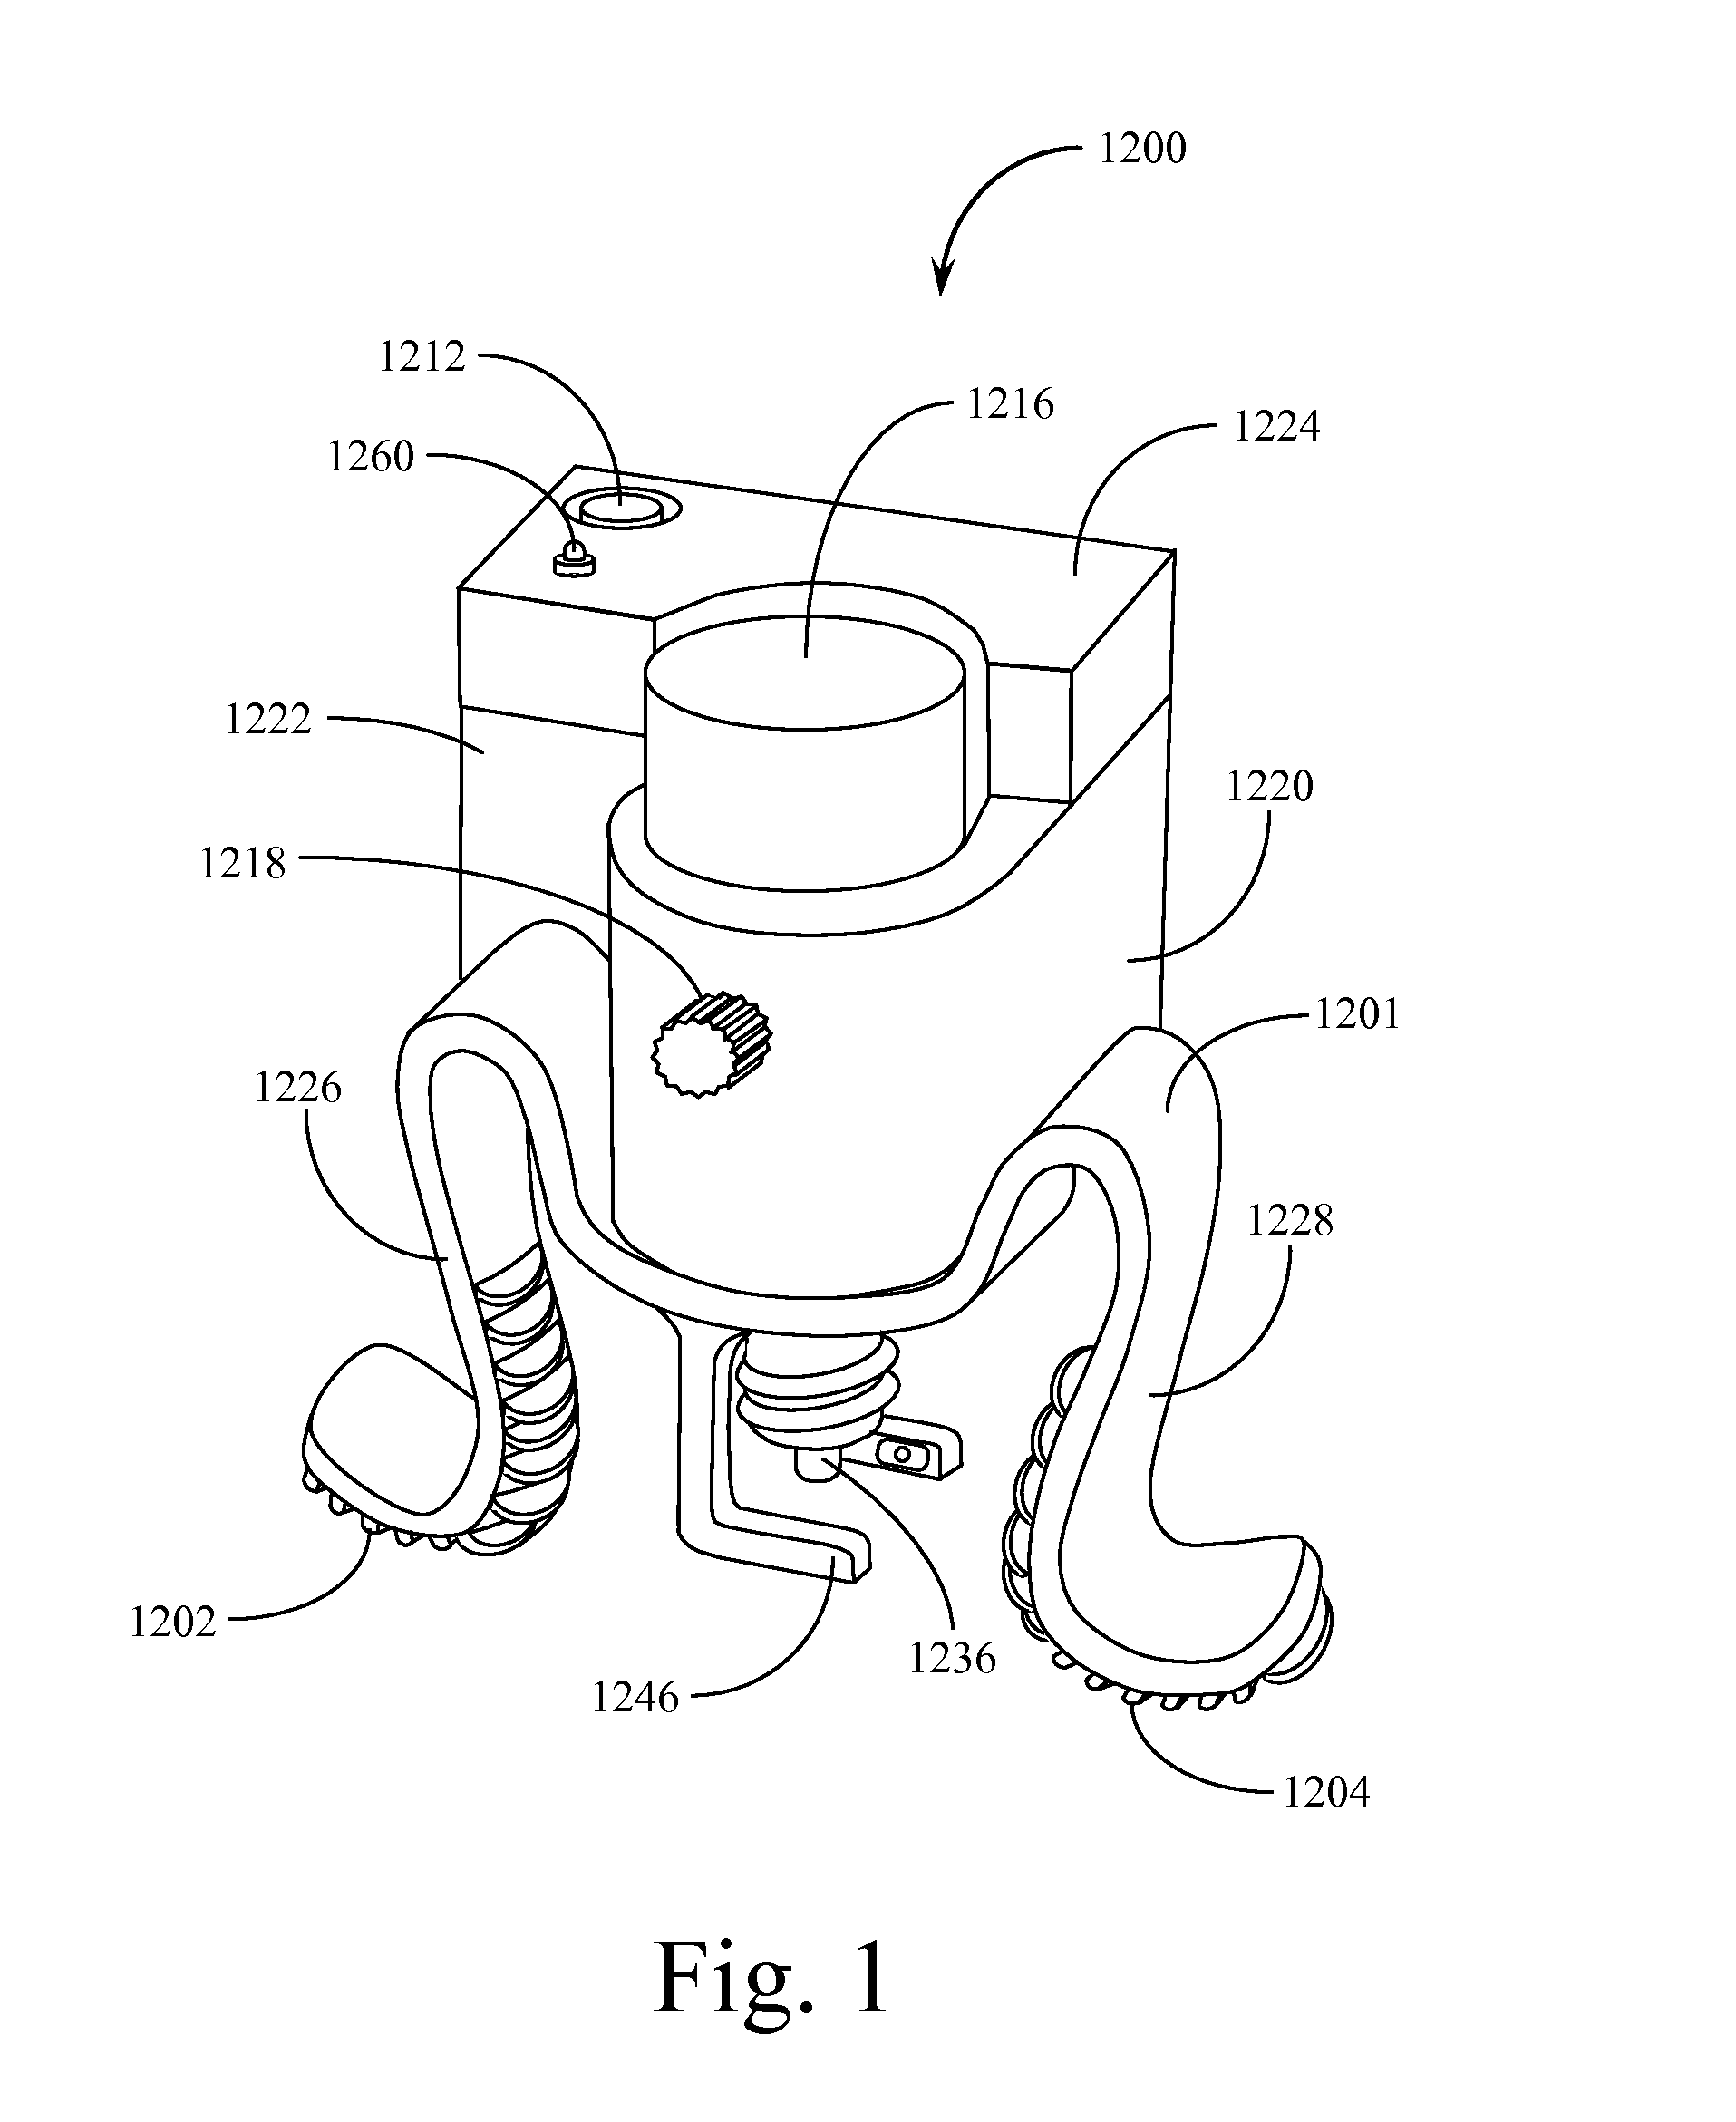 Automated Incremental Eyedrop Delivery System with Eyelid Retracting Legs